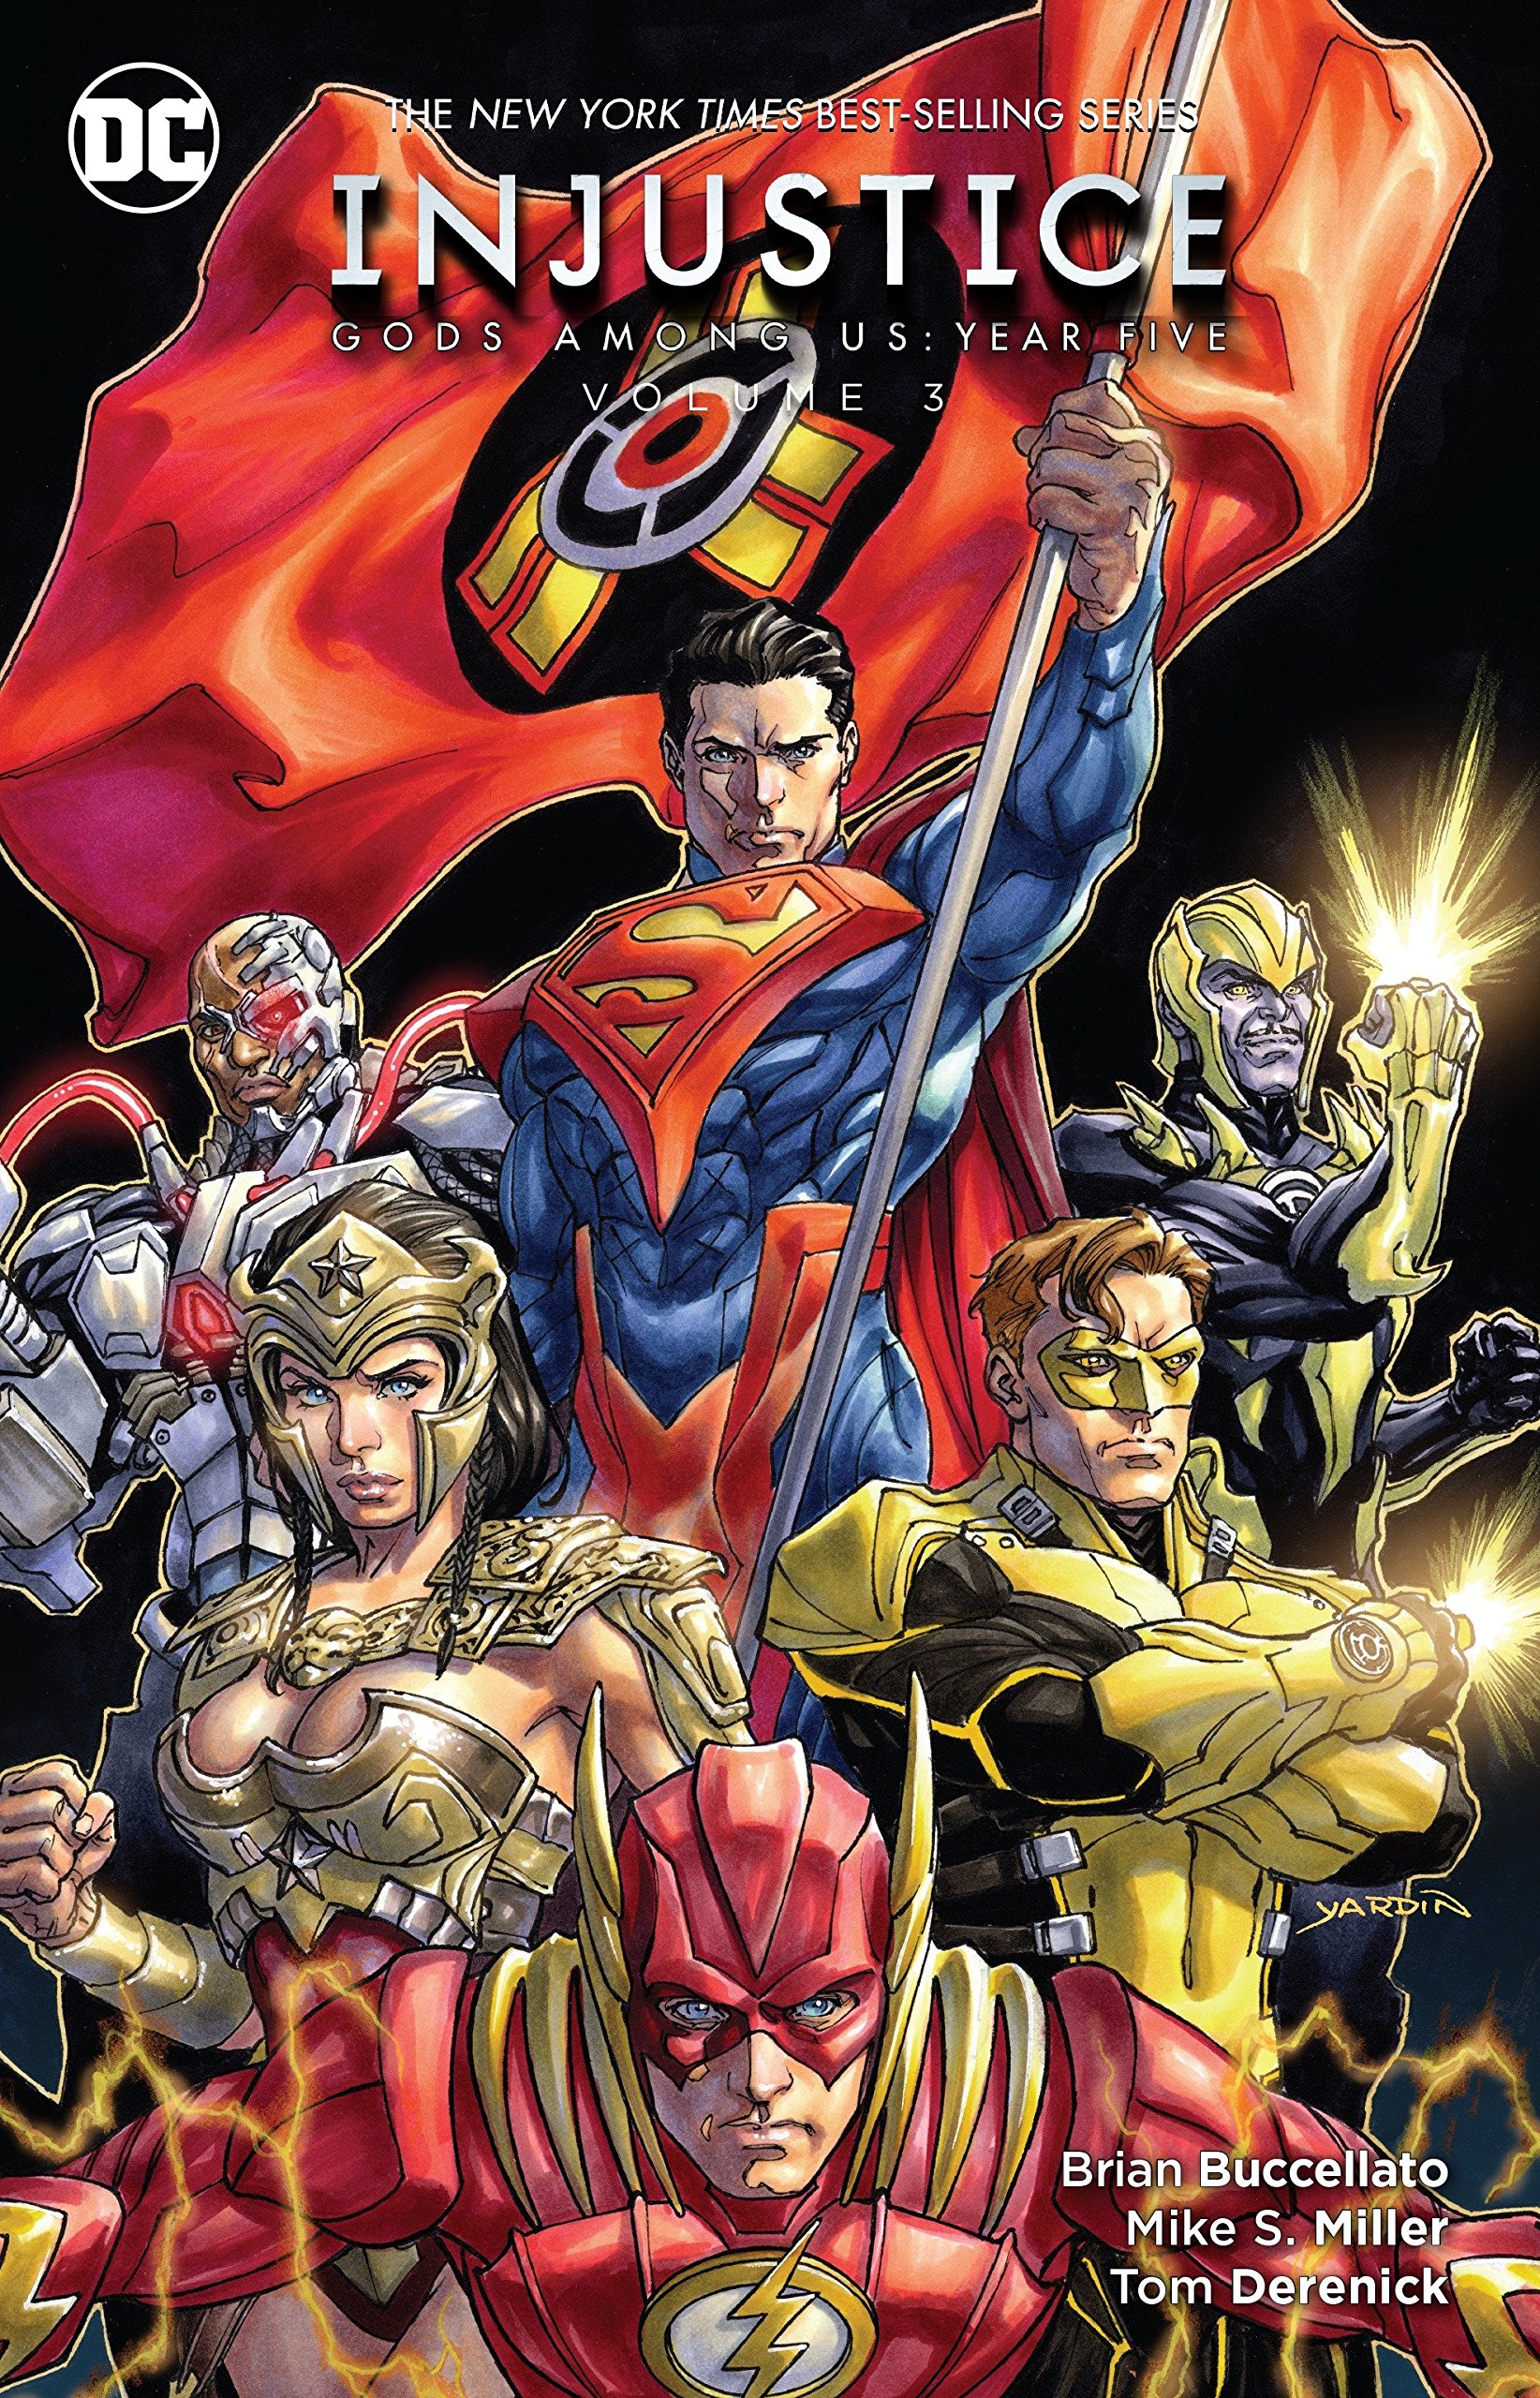 Injustice: Gods Among Us: Year Five - Volume 3 | Brian Buccellato